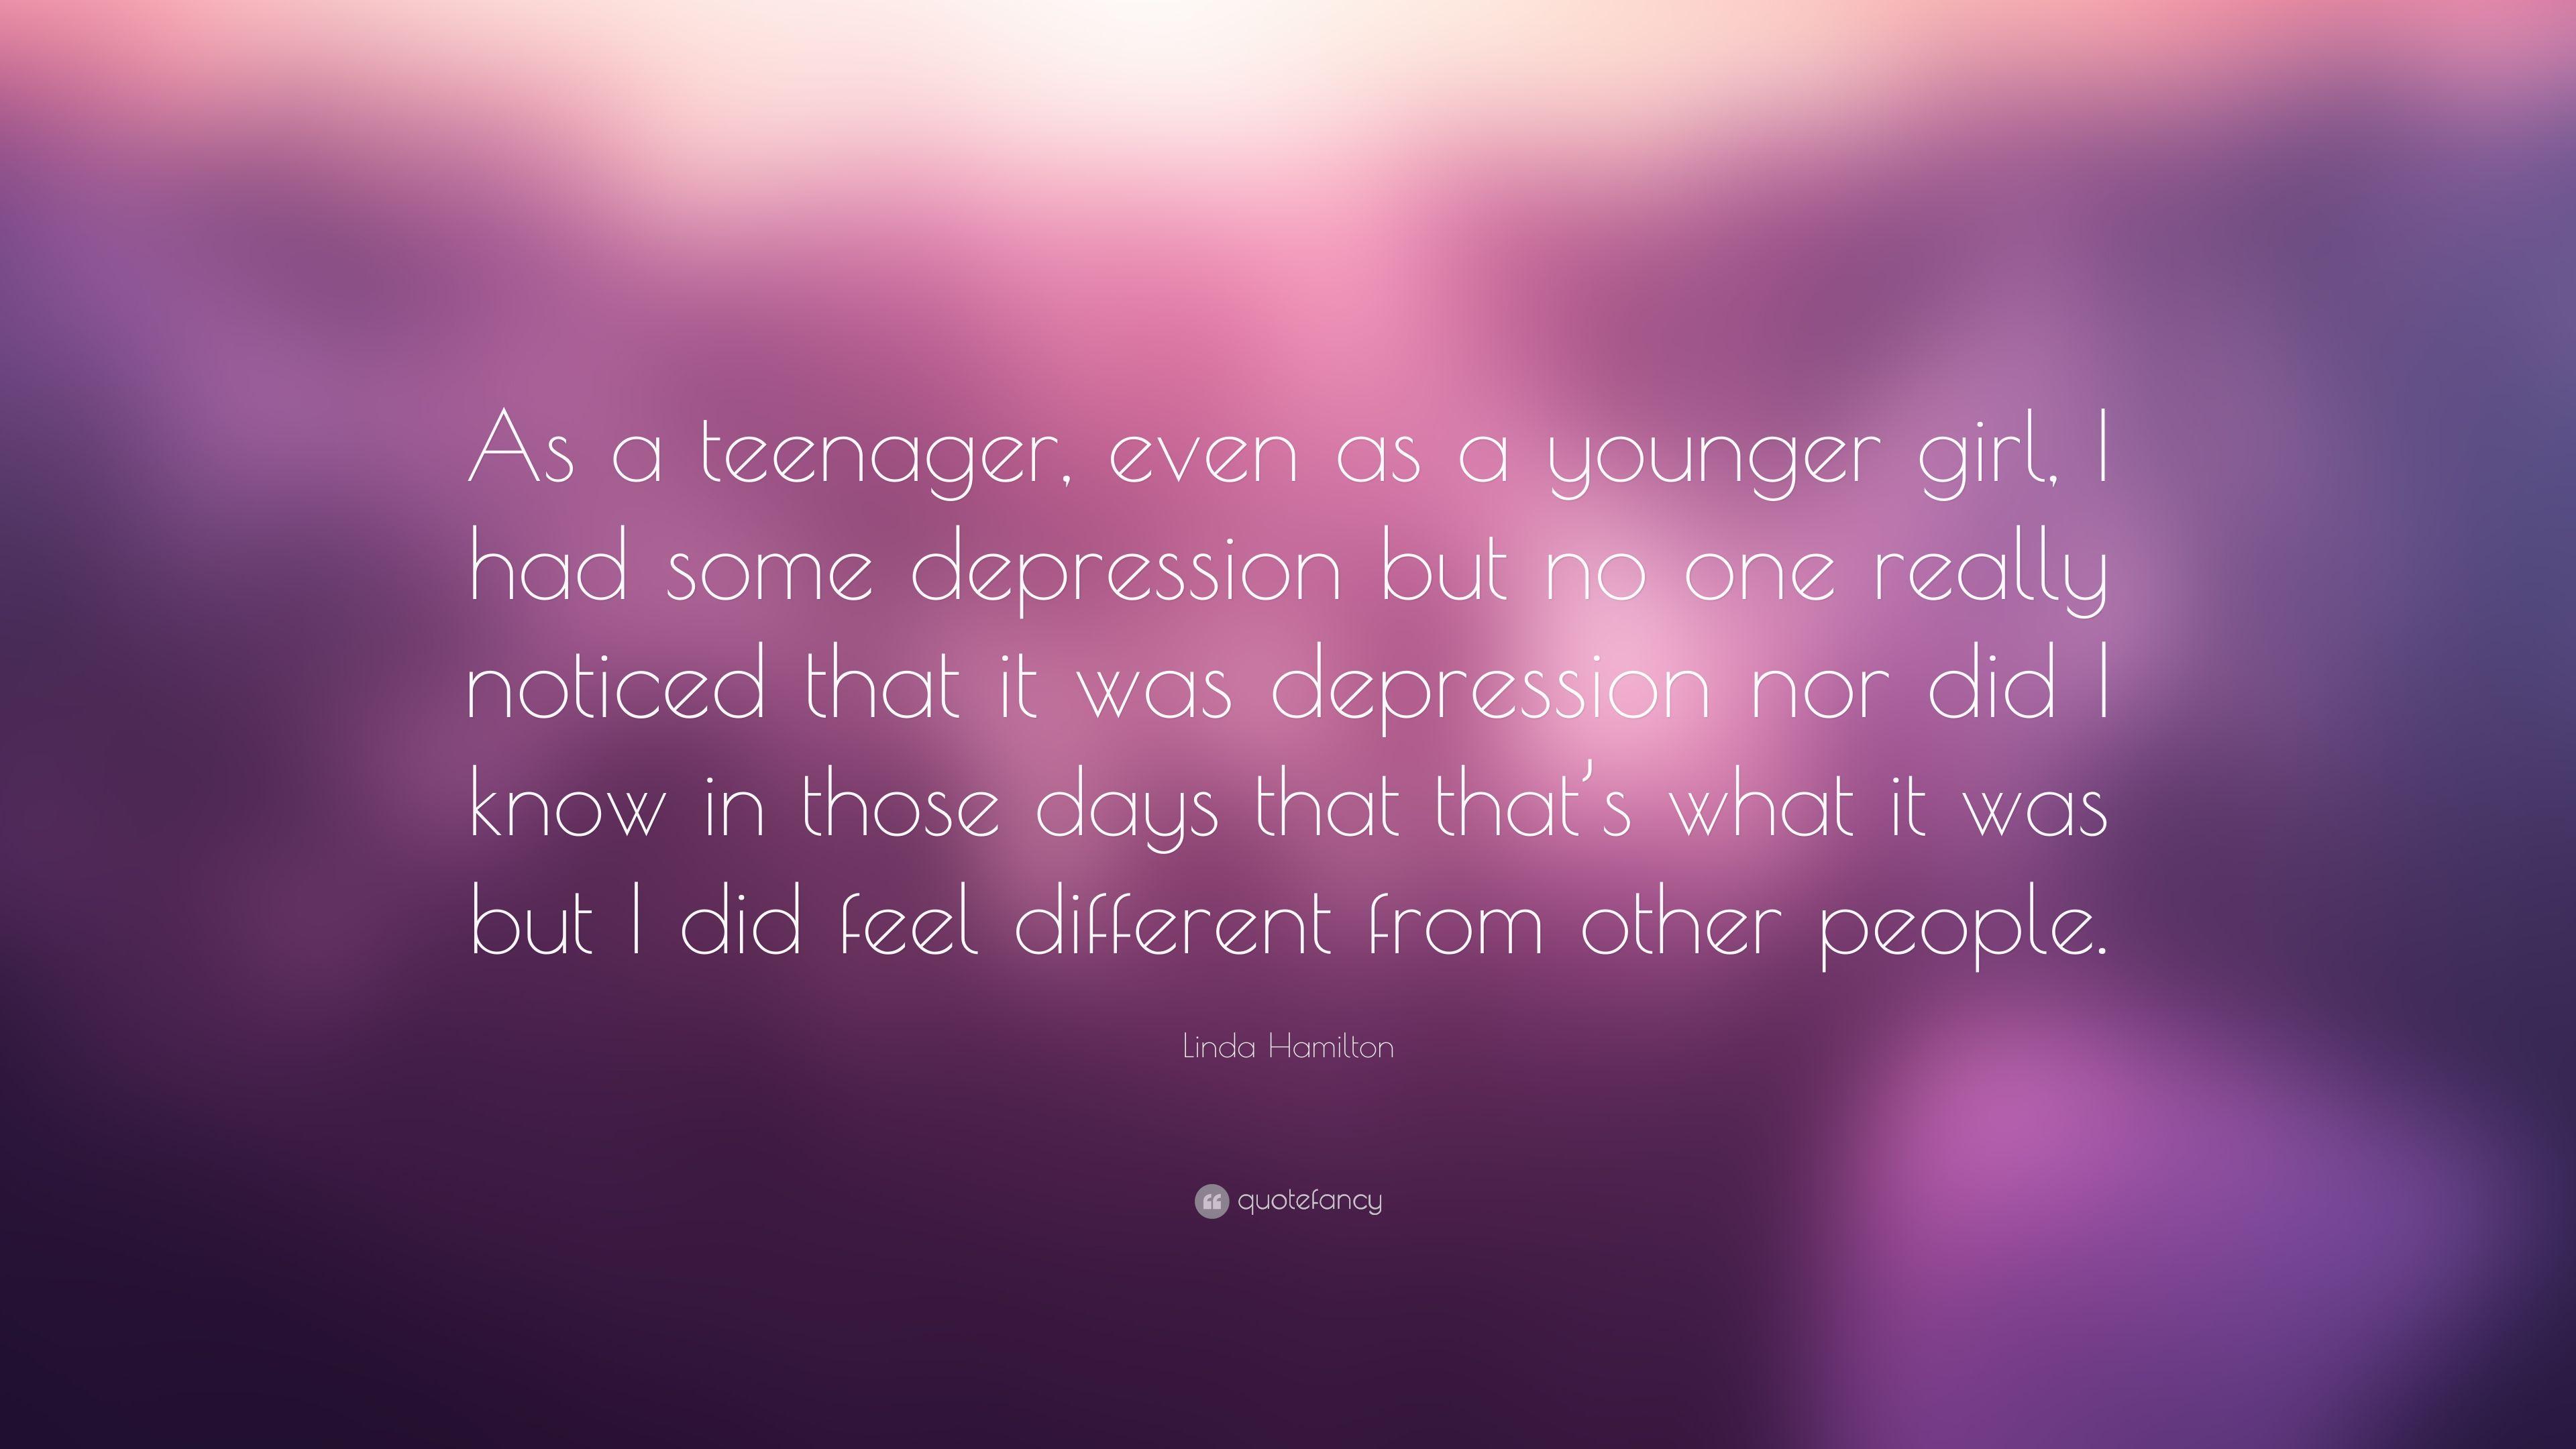 Linda Hamilton Quote: “As a teenager, even as a younger girl, I had